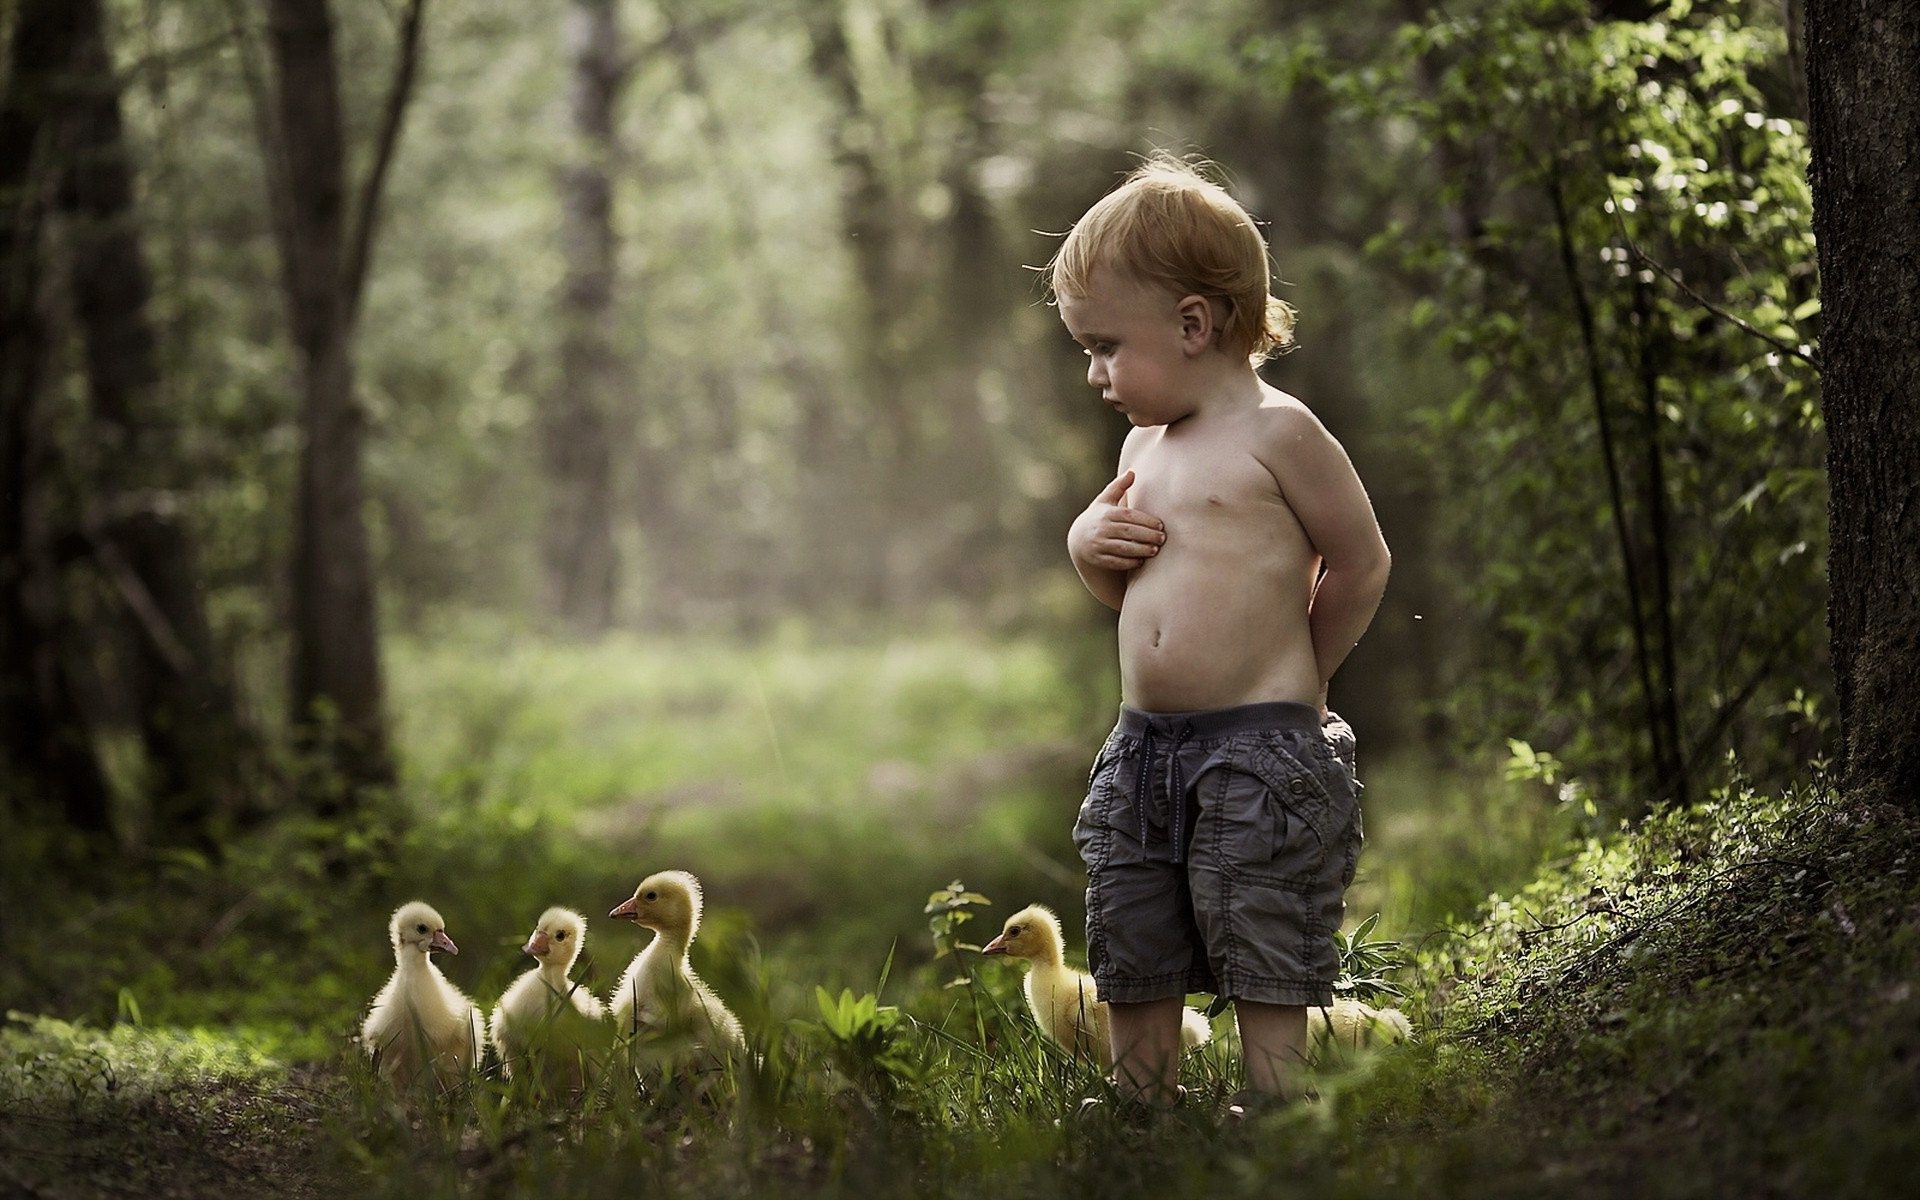 Cute Little Baby Boy with Chicks in Park HD Images